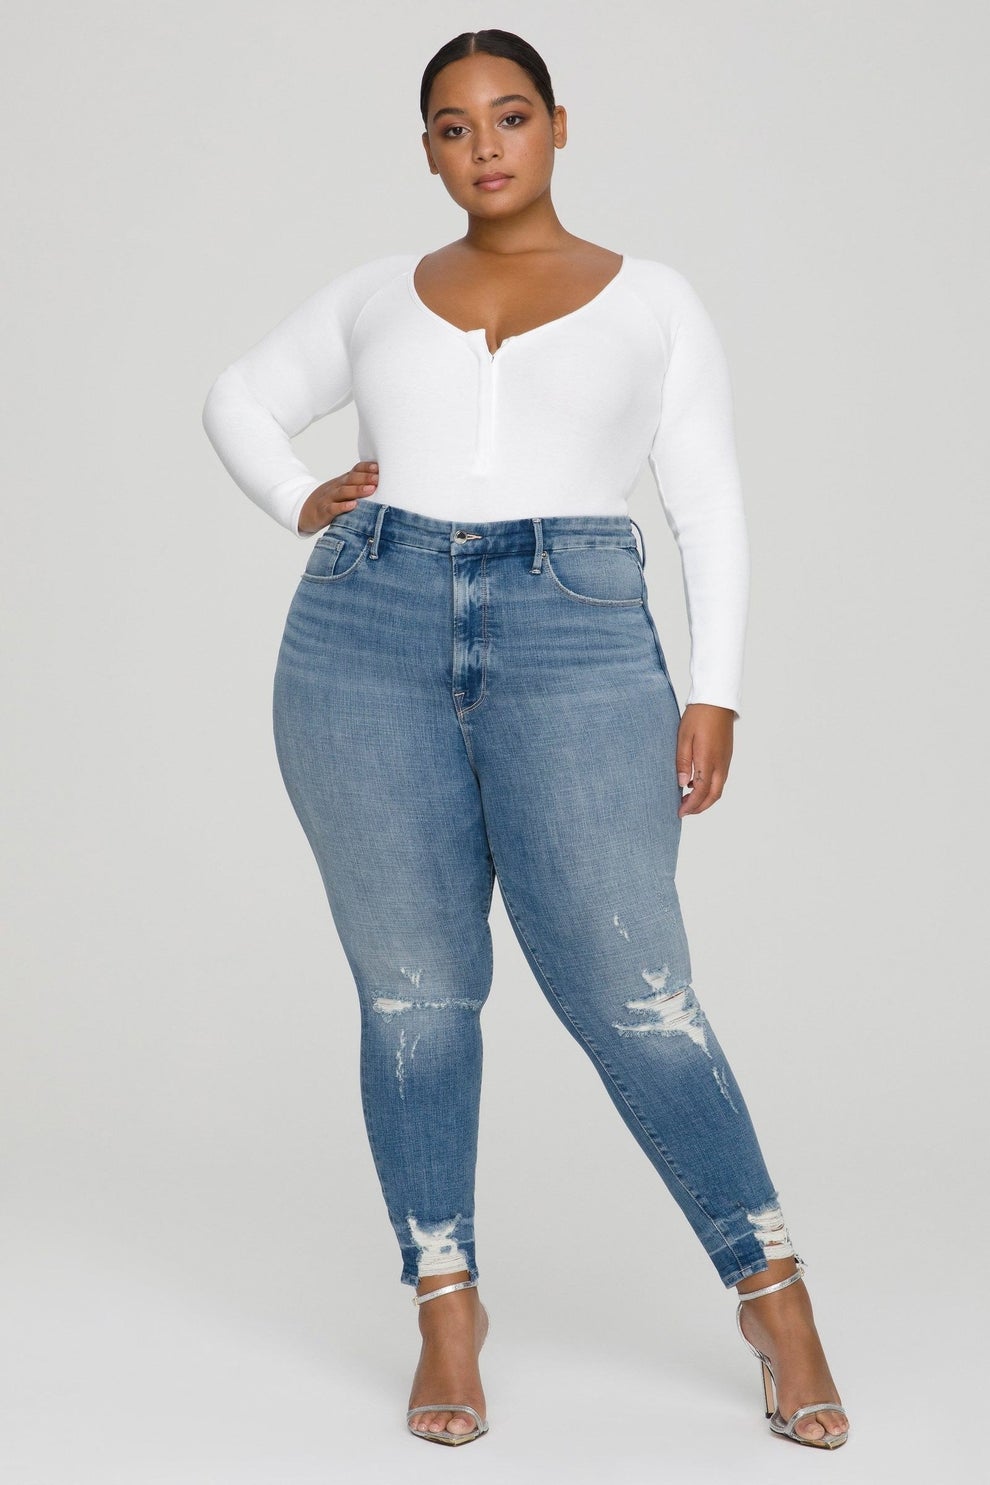 Matematisk skrivebord se tv 17 Best Plus Size Jeans That Are *Actually* Comfortable